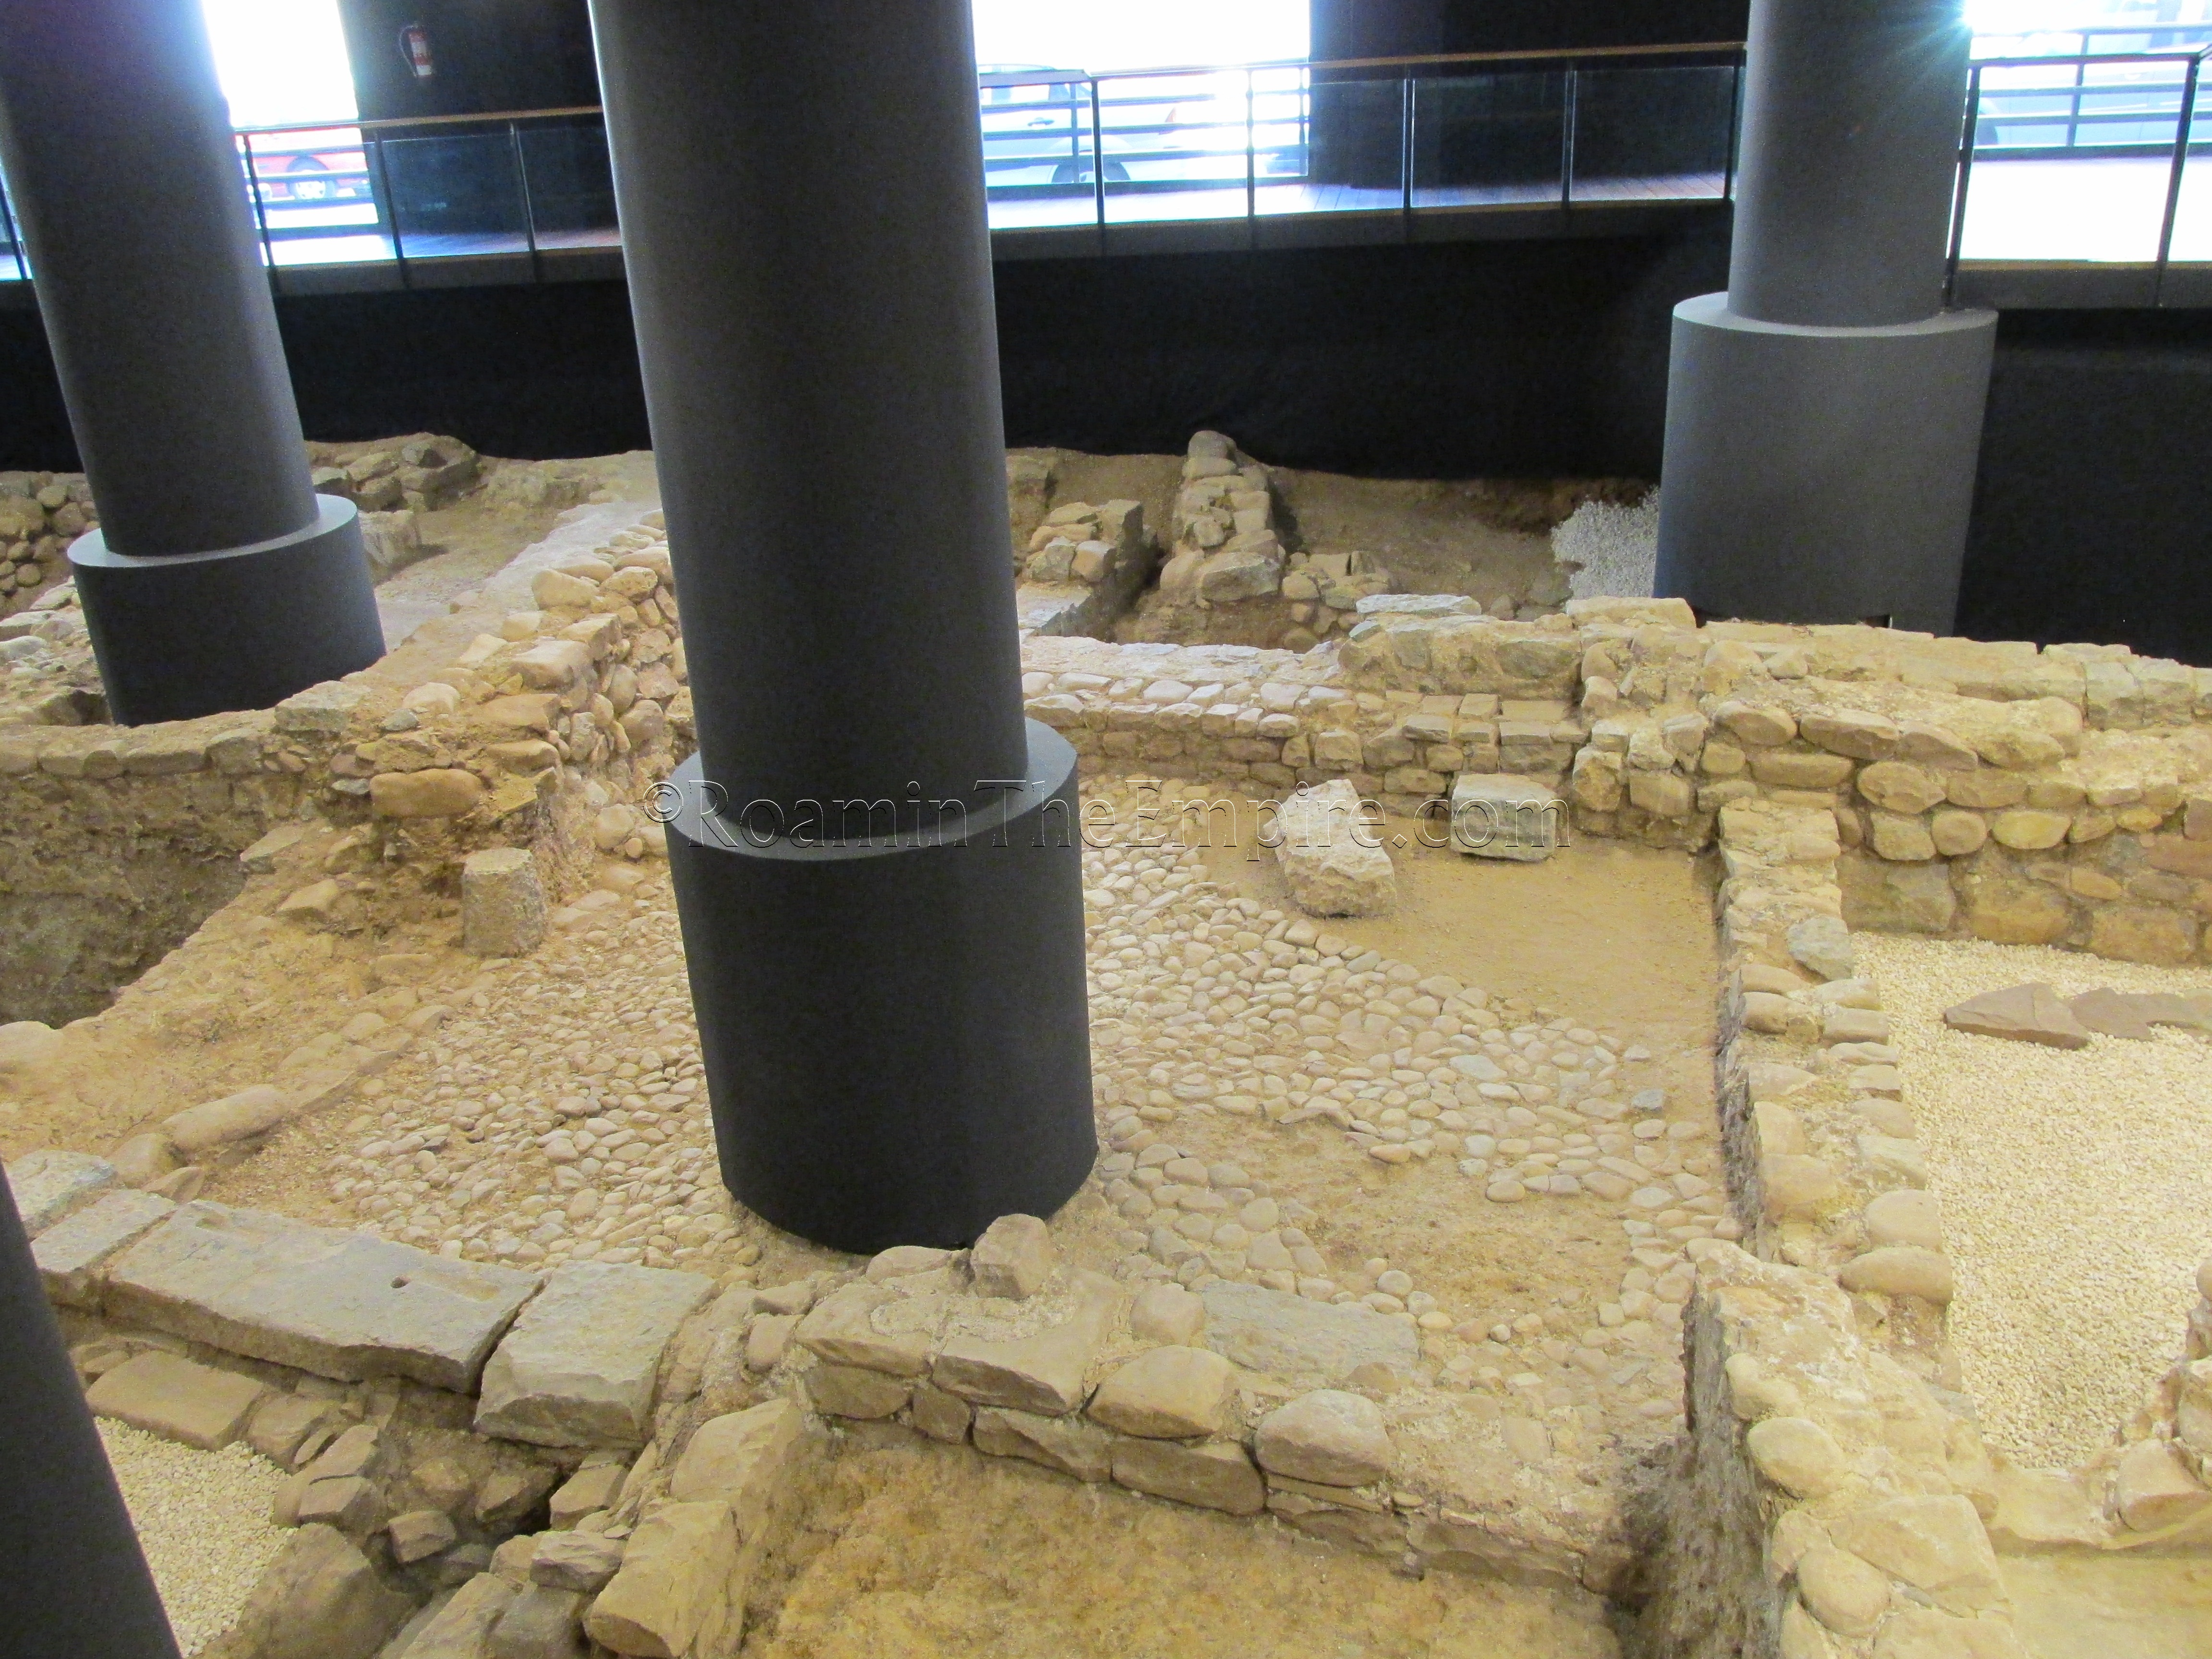 Domus in the south room.